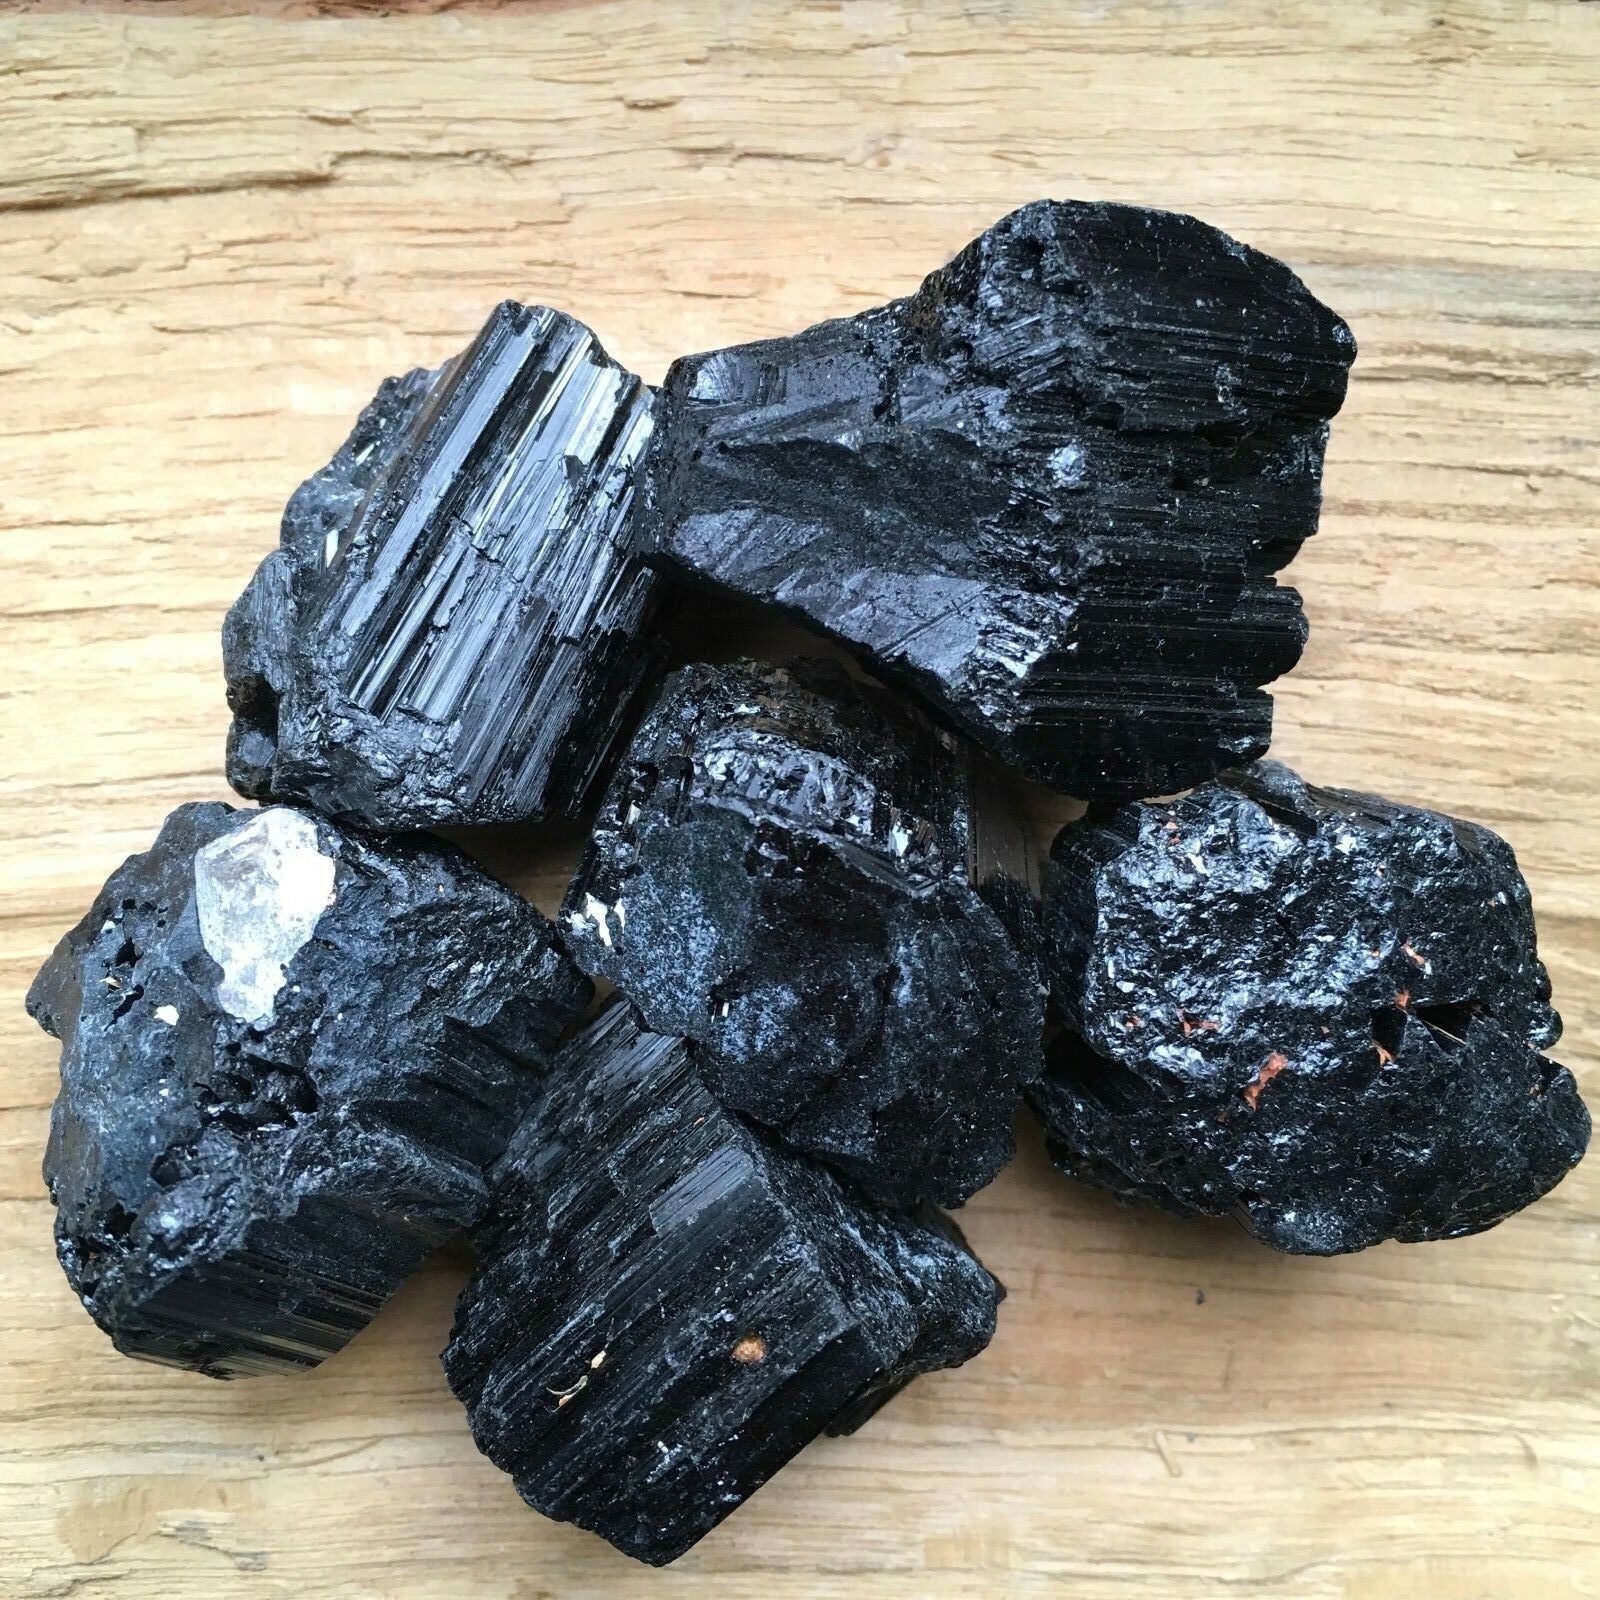 Black Tourmaline Meanings, Properties and Uses